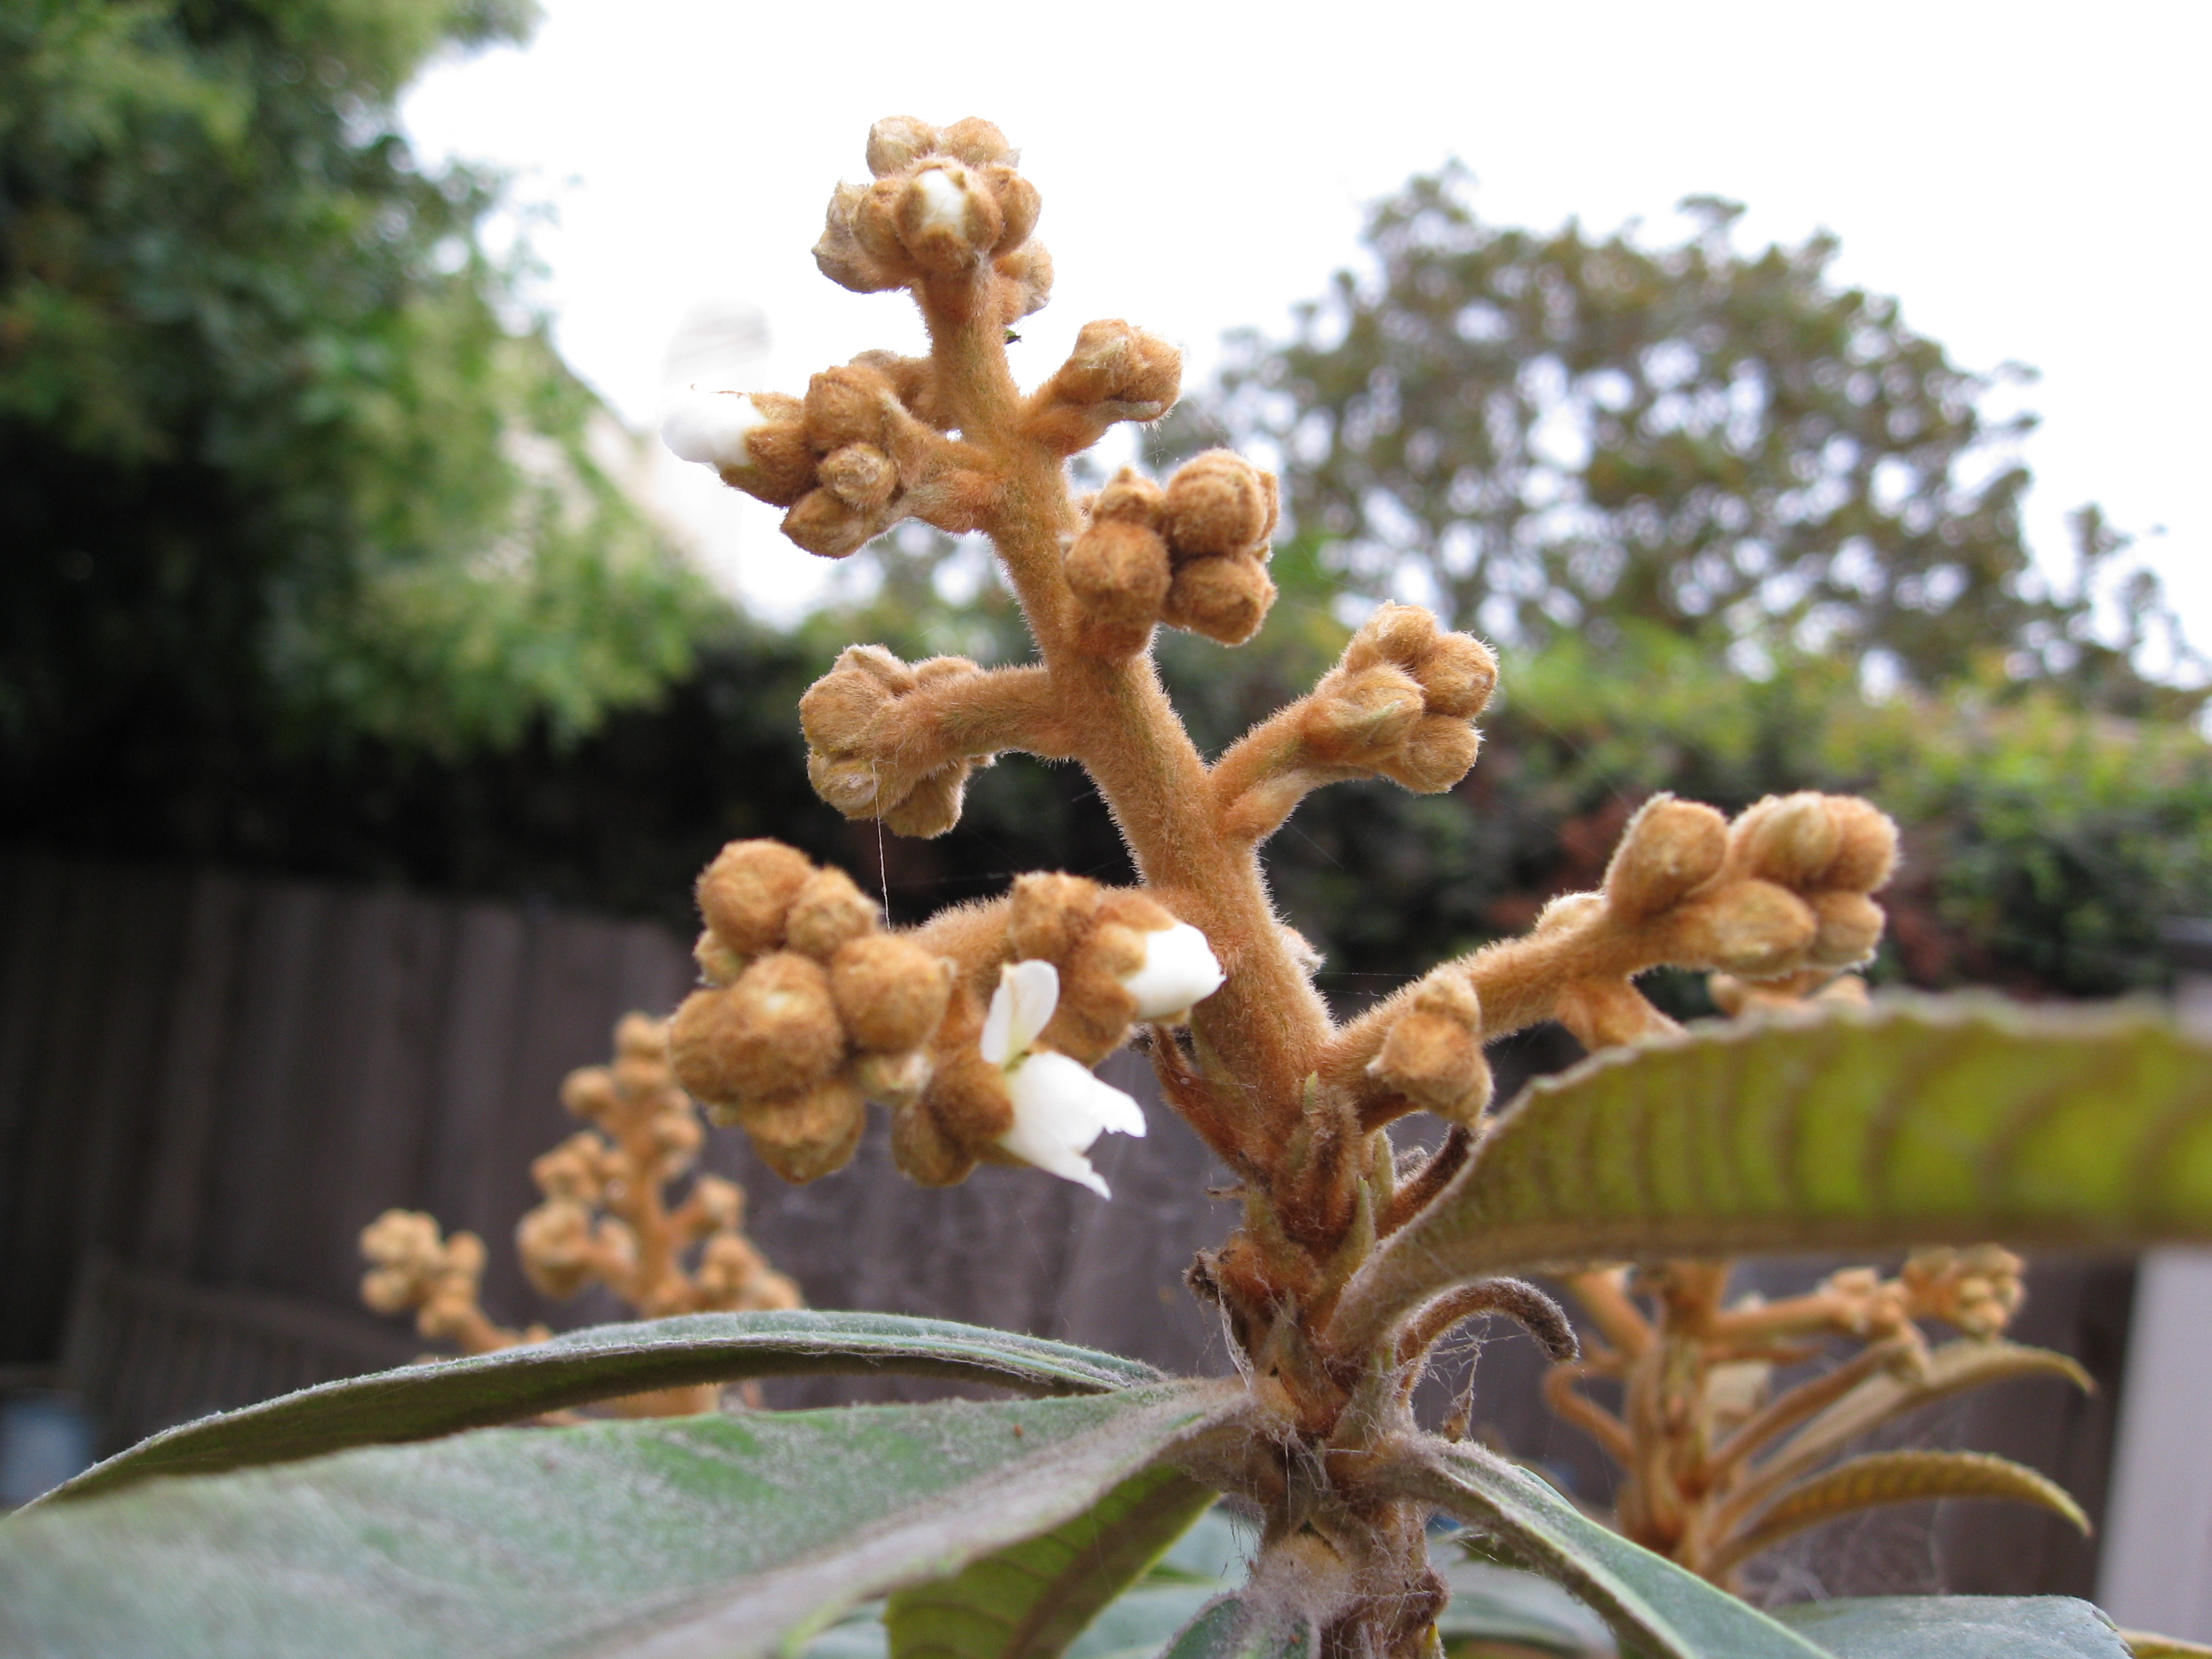 Our rescued loquat tree is starting to bloom.